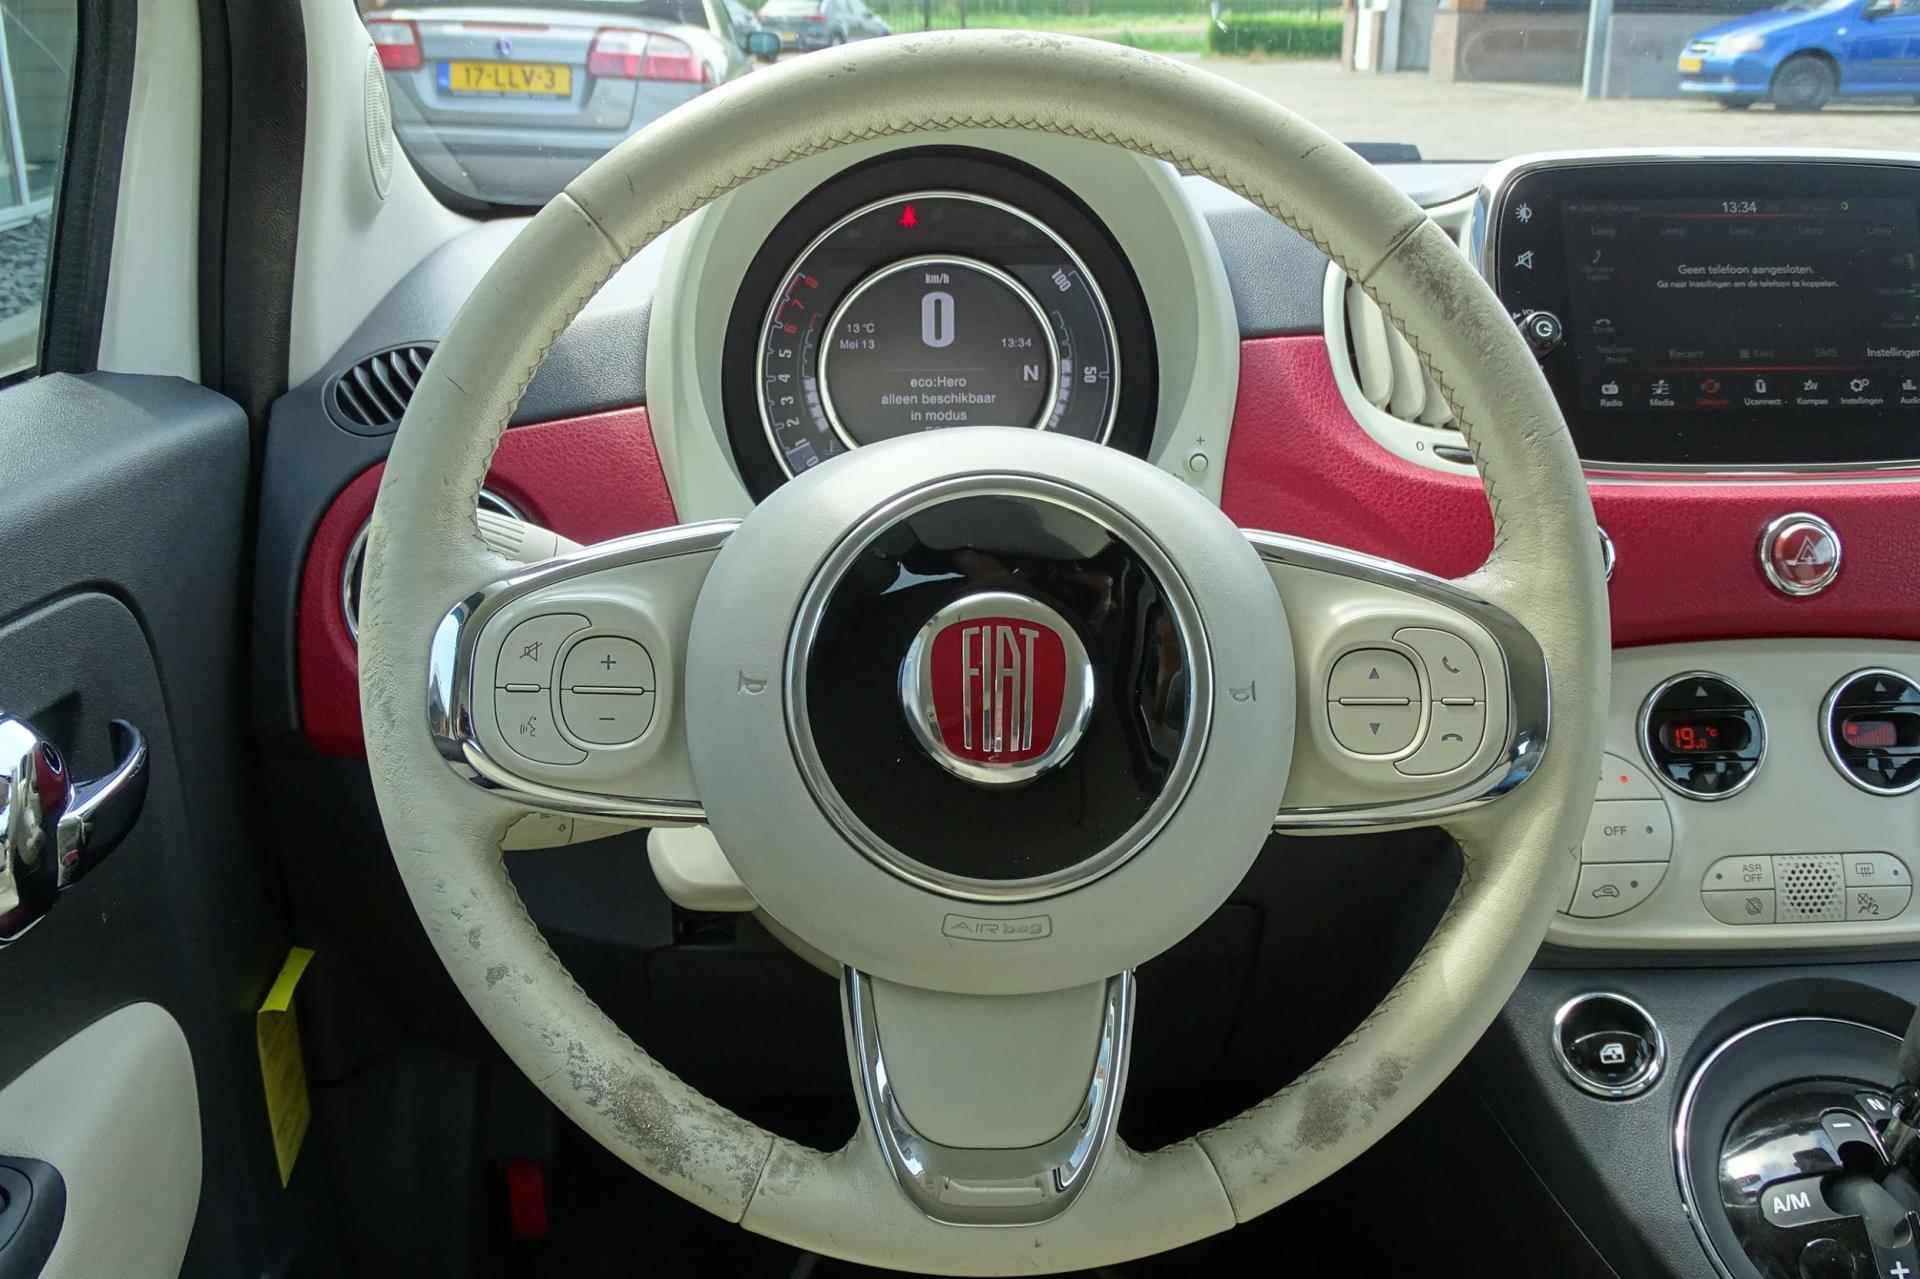 Fiat 500 C 0.9 TwinAir Turbo Forever Young - 14/41